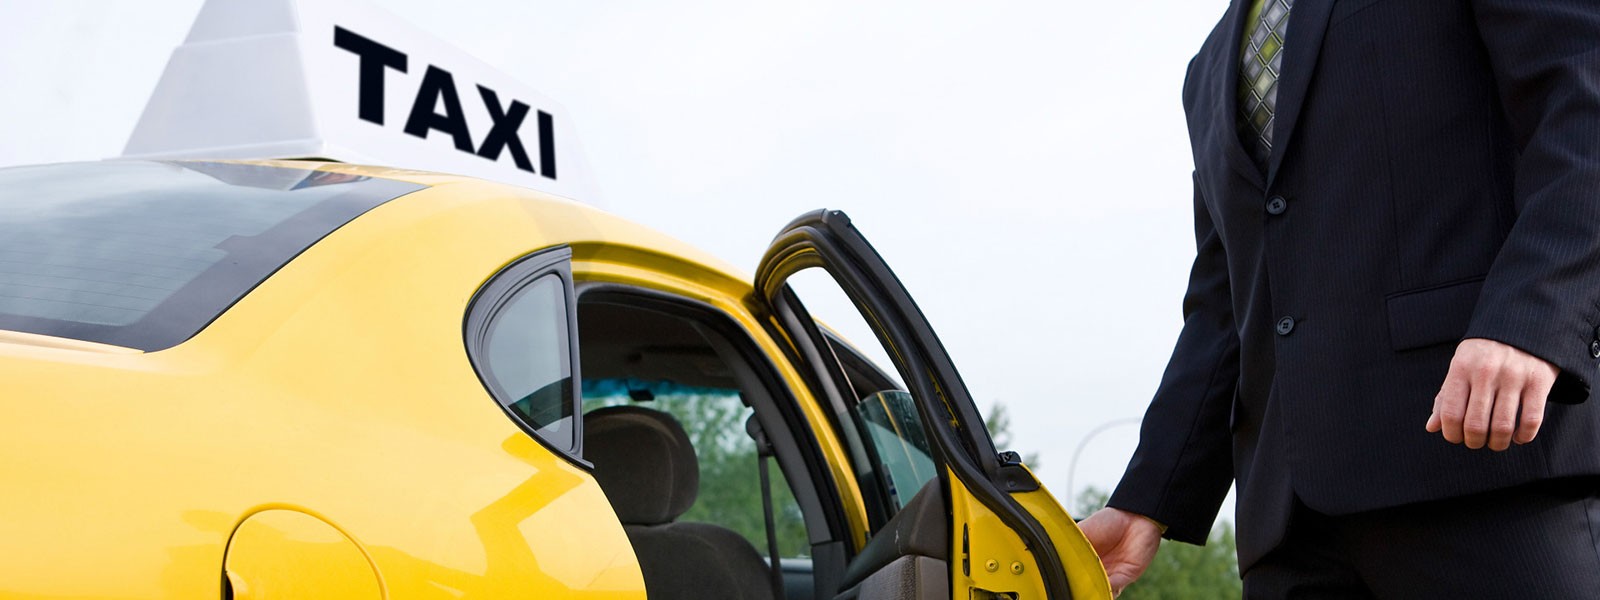 Best Taxi Services, local taxi near me service Lockhart FL